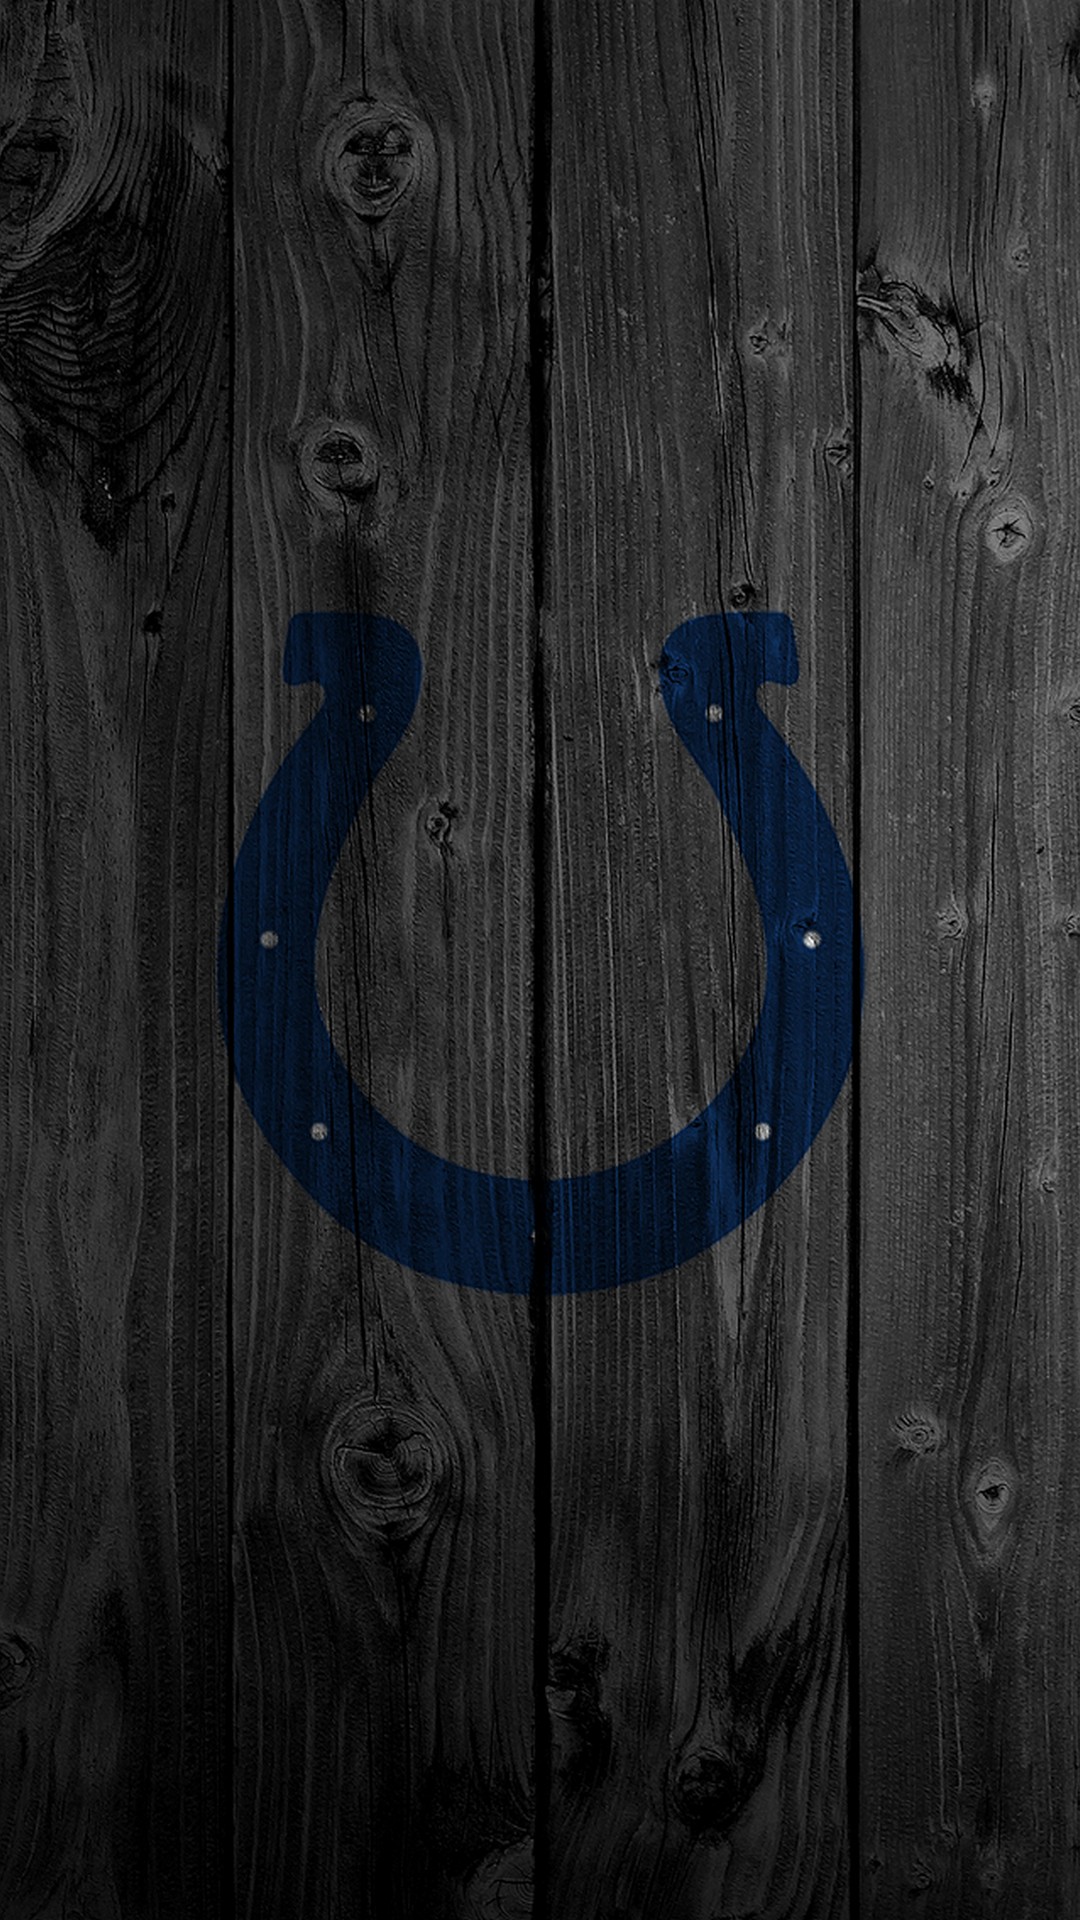 Indianapolis Colts iPhone 8 Plus Wallpaper with high-resolution 1080x1920 pixel. Download and set as wallpaper for Desktop Computer, Apple iPhone X, XS Max, XR, 8, 7, 6, SE, iPad, Android